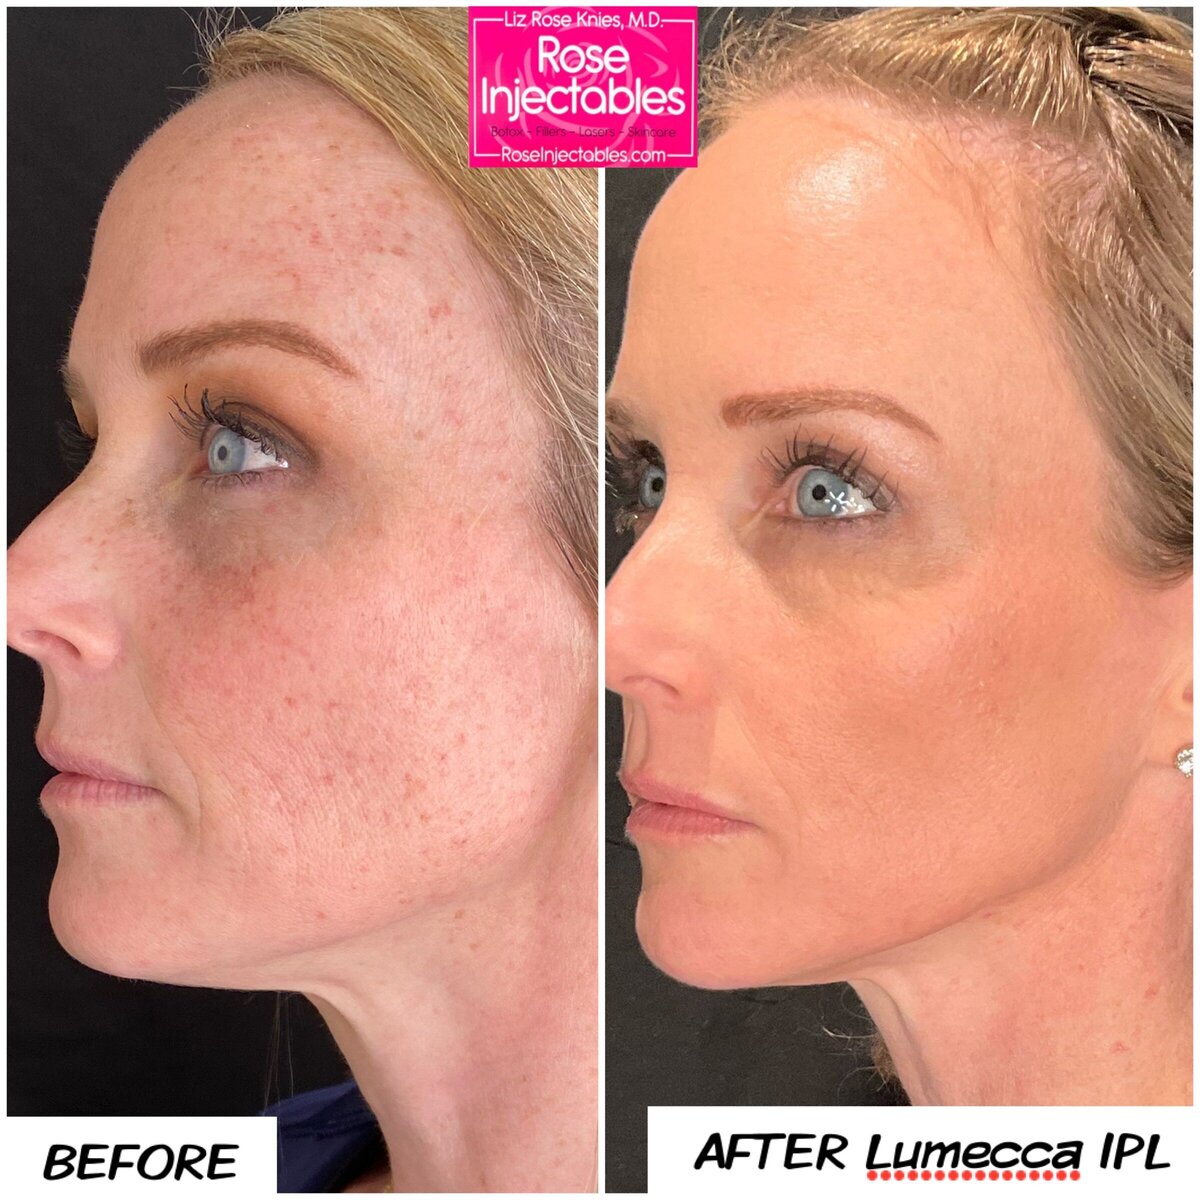 Before and after photos of Lumecca IPL procedure at Rose Injectables